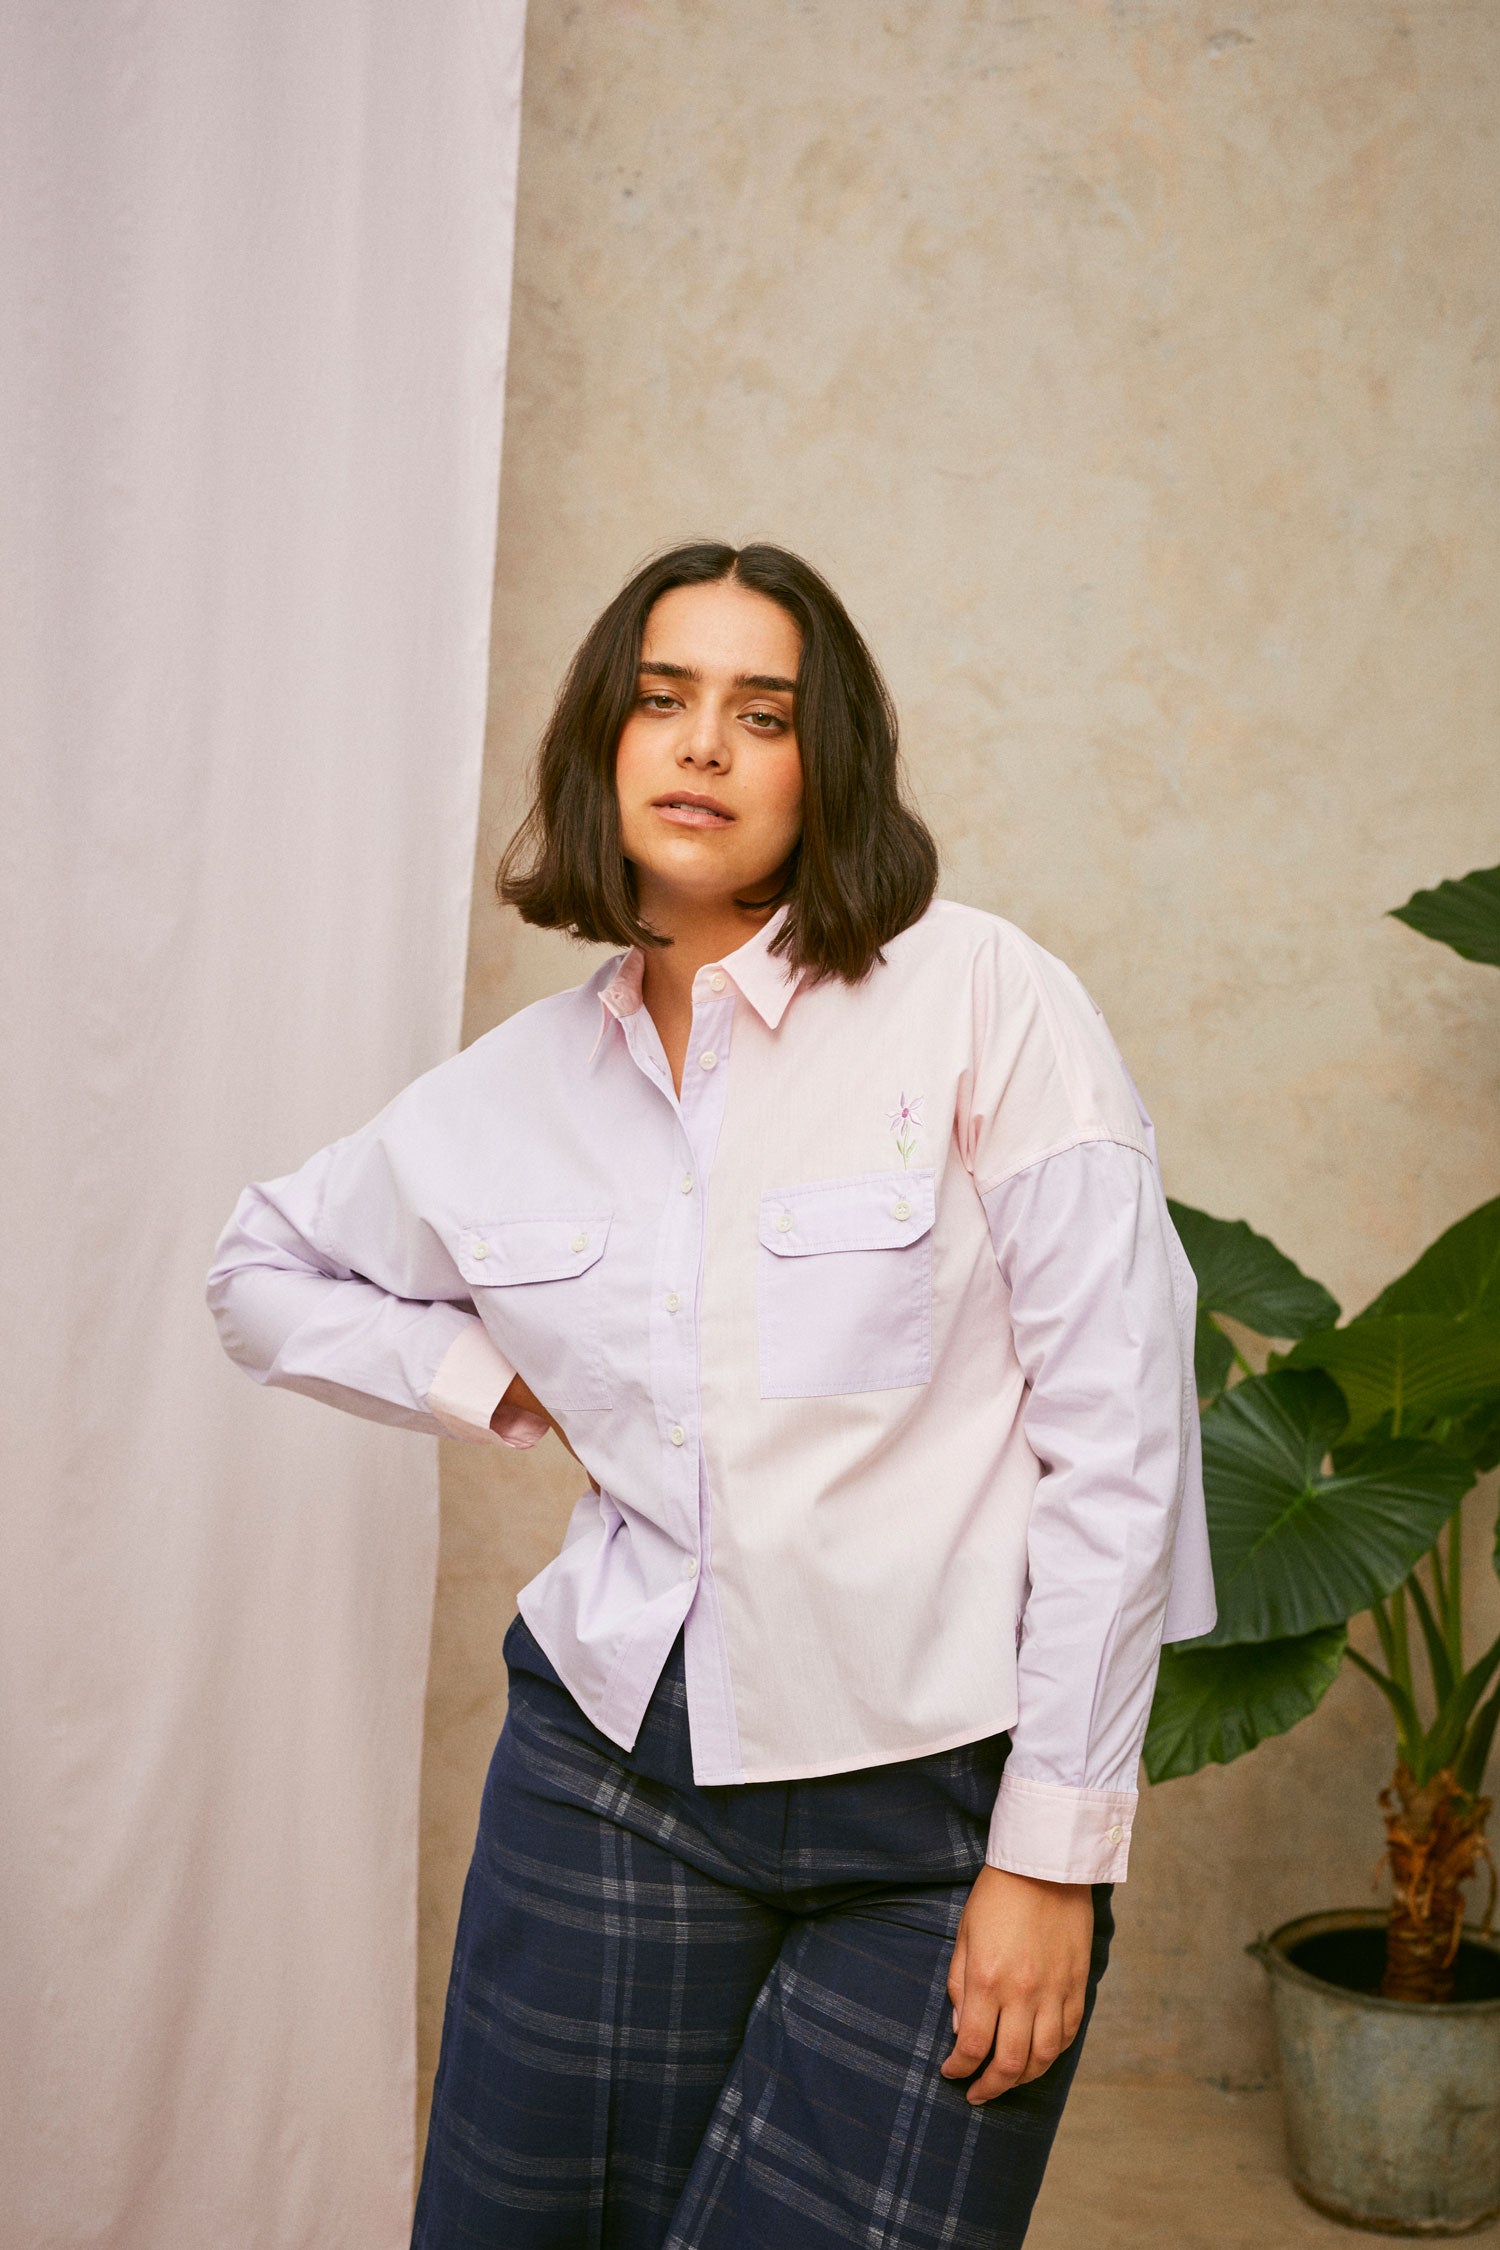 Model wears the Jules Utility Shirt: colourblocked pink and lilac shirt with a boxy silhouette. Jules Shirt from Saywood with embroidered flower detail and utility style pockets. Worn with a navy check trouser, she stands in front of a pink fabric drop and a plant.